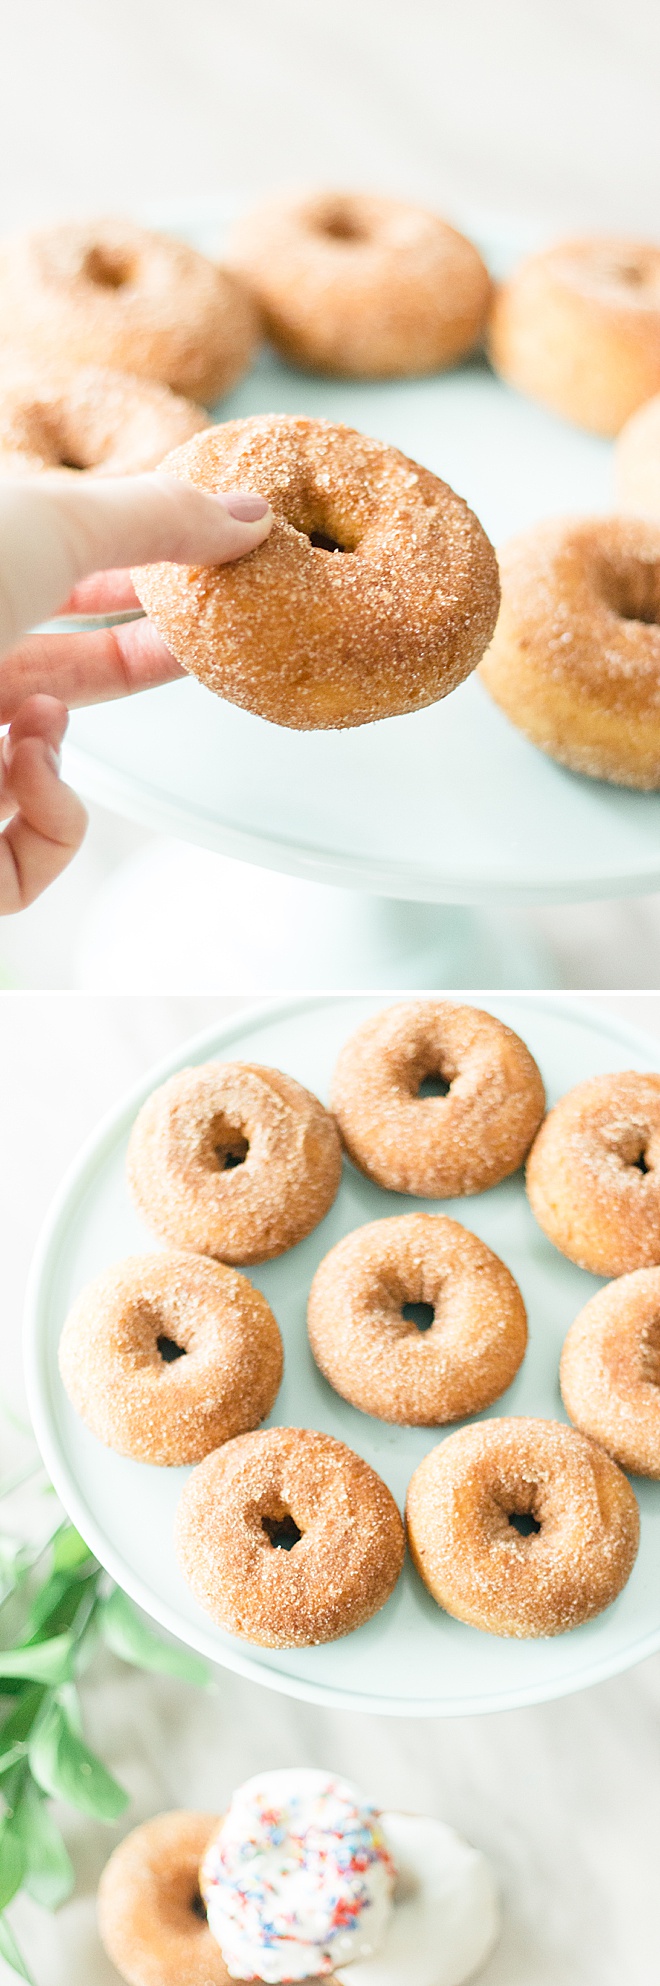 Learn how to make this simple and delicious DIY donut wedding cake!